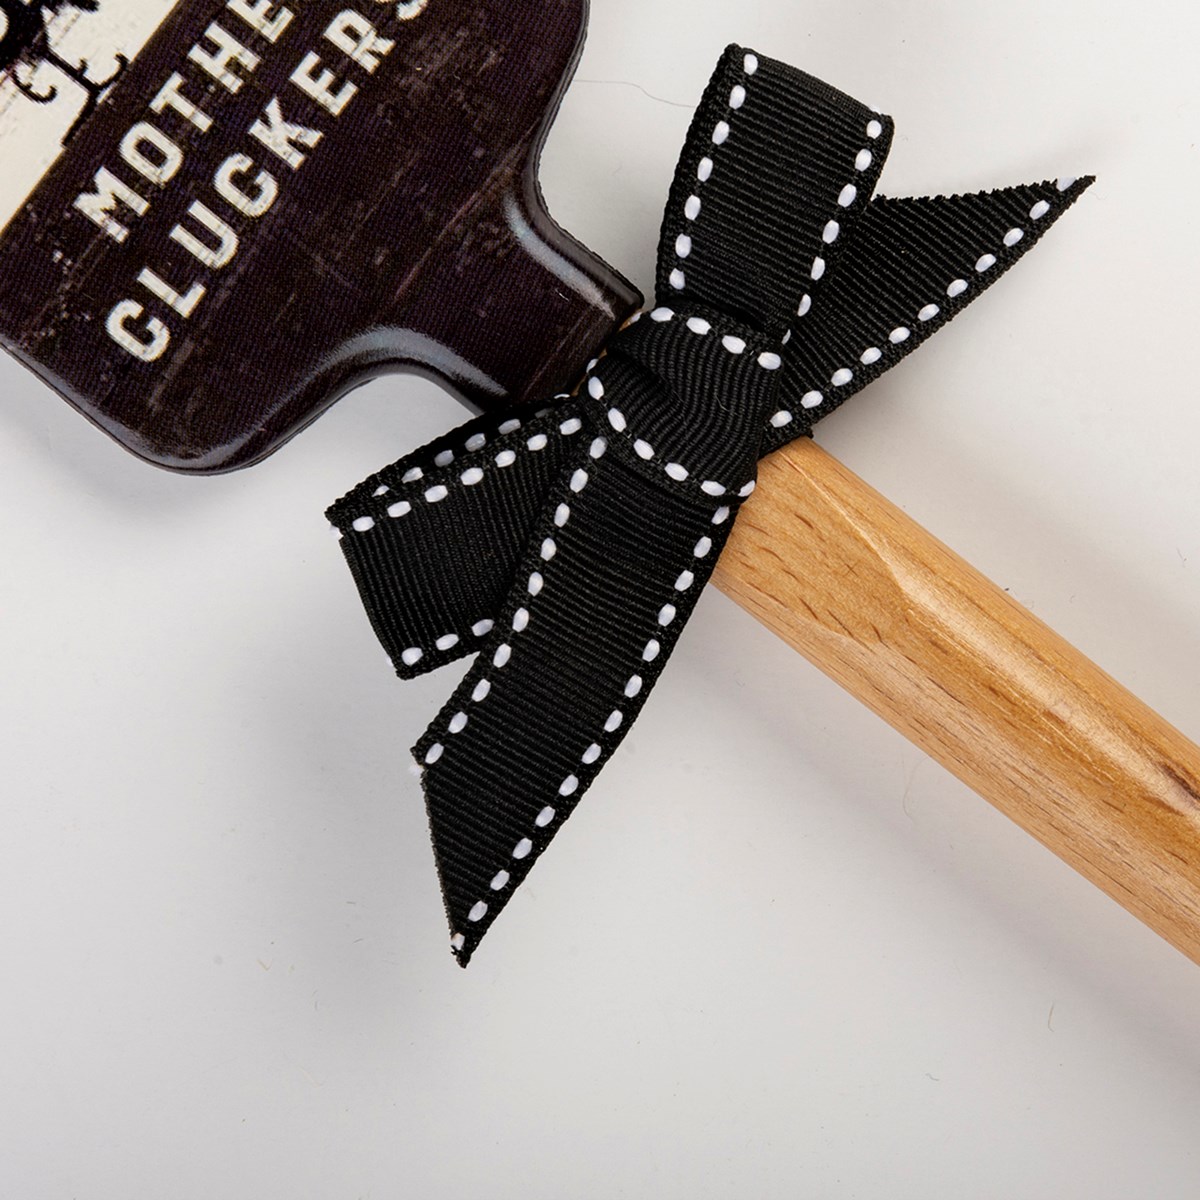 Rise & Shine Mother Cluckers Spatula - Silicone, Wood